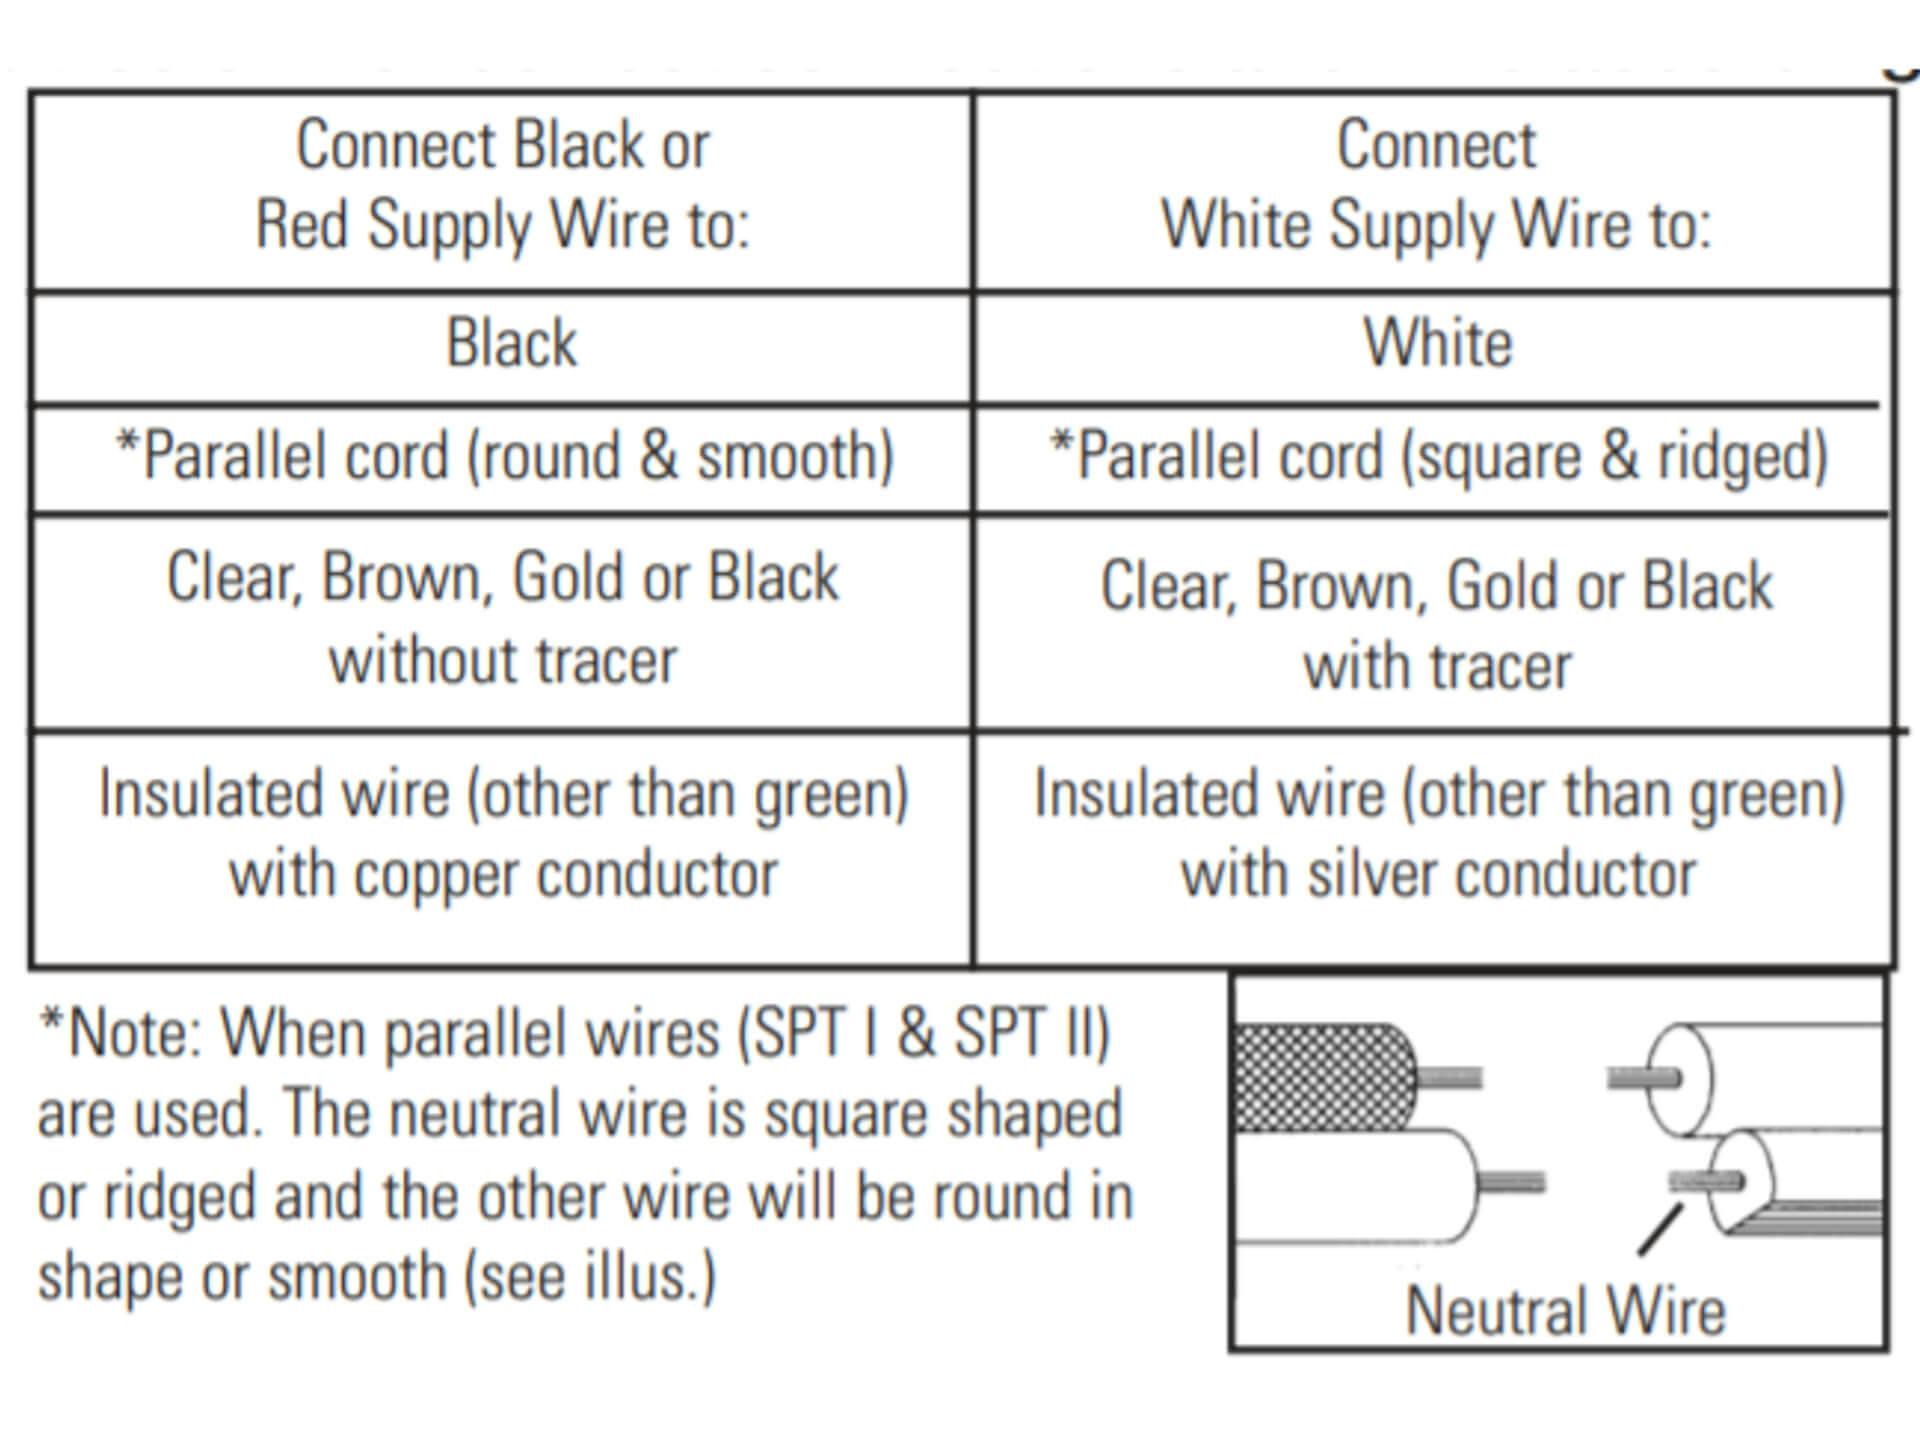 Graphic describing connecting a black or red wire to black as well as connecting white wires to white wires.